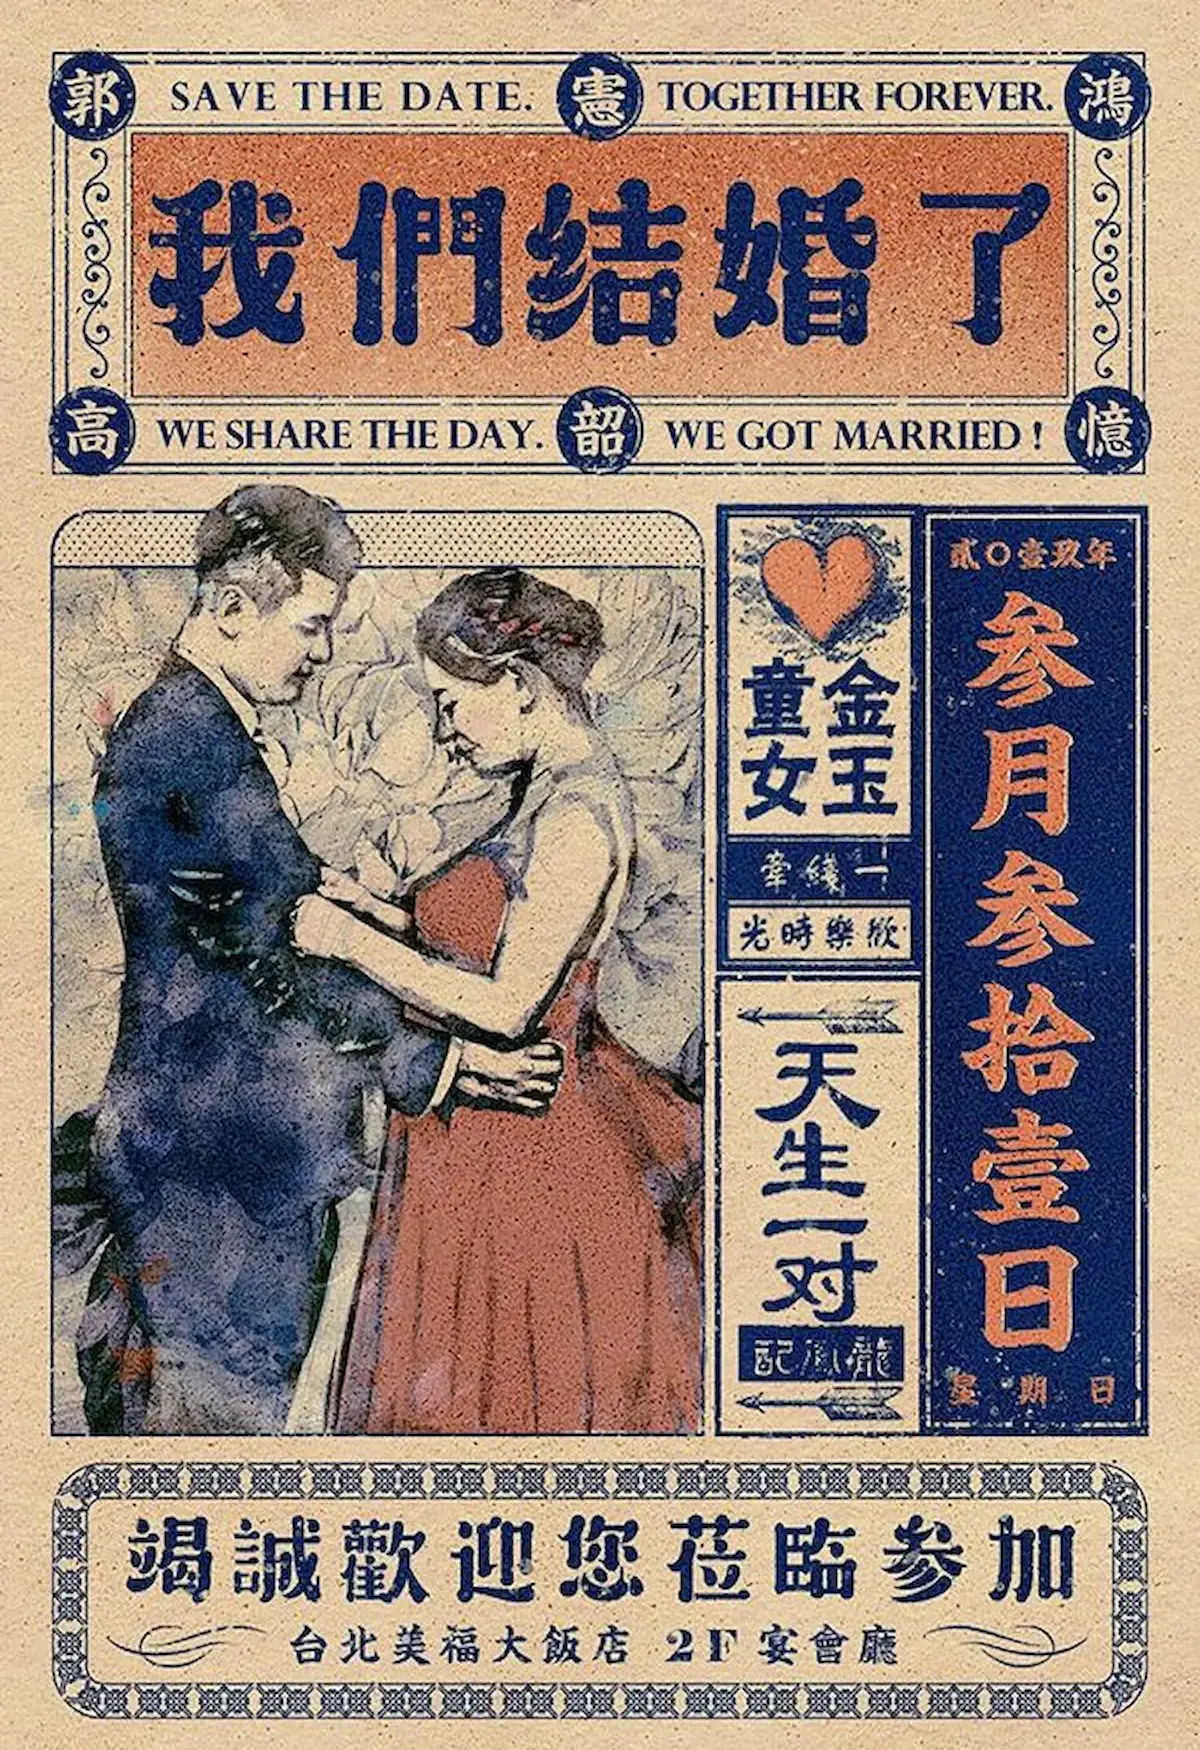 Vintage poster of a couple getting married